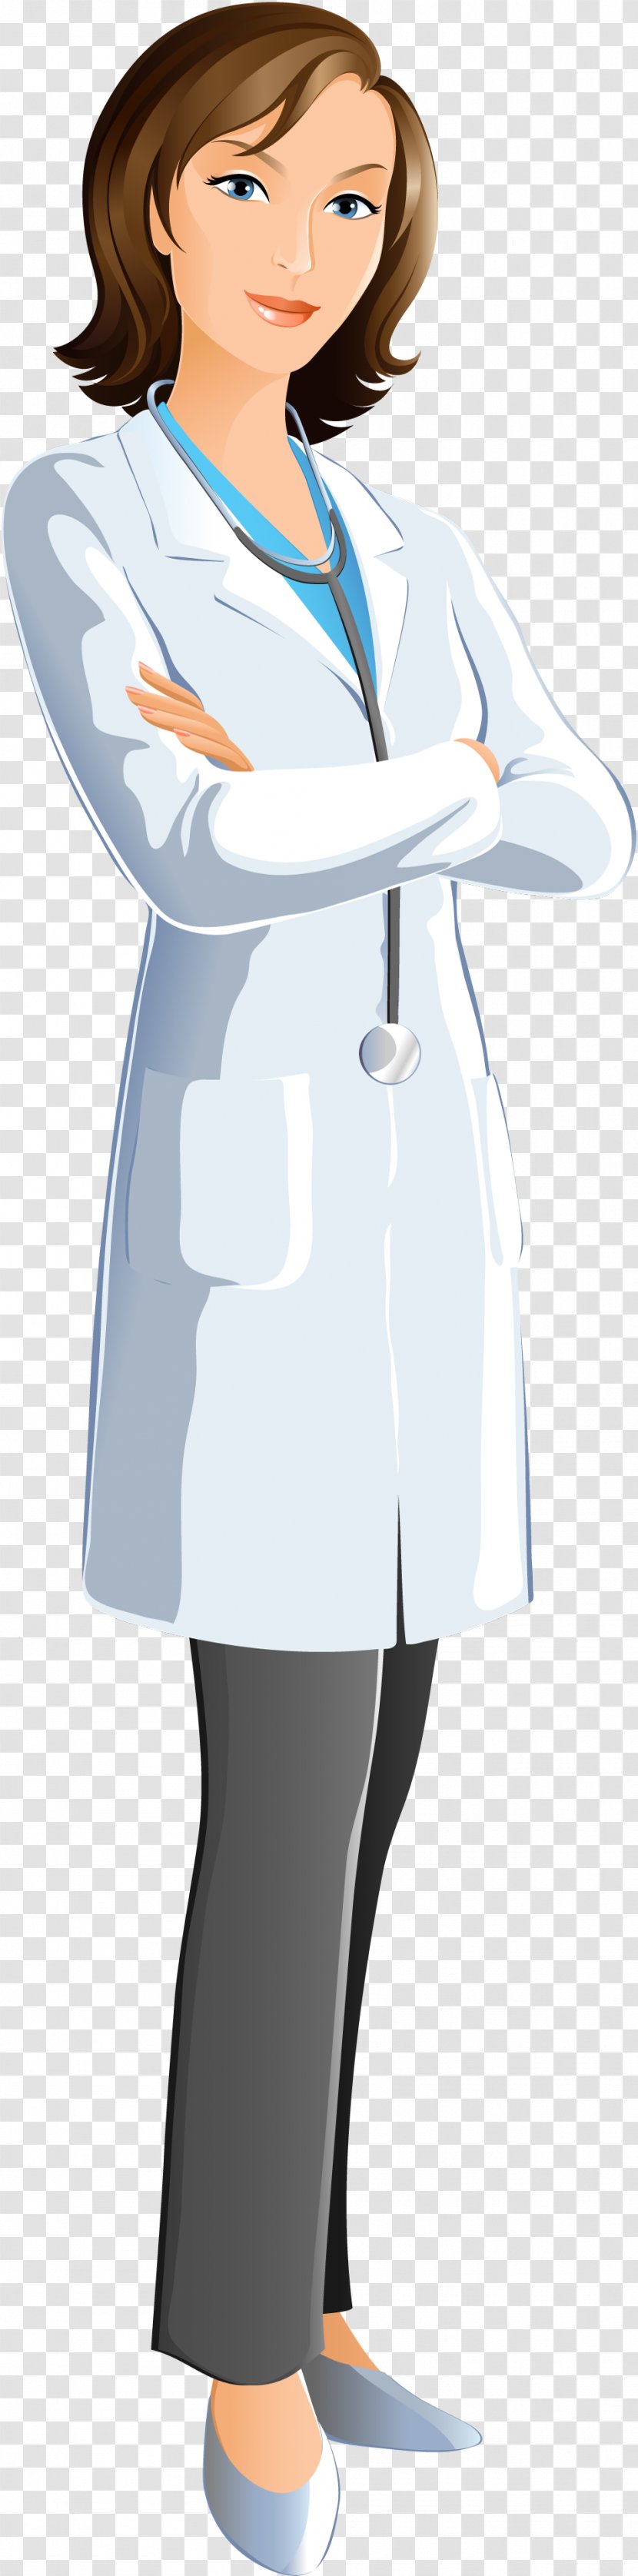 Physician Female Clip Art - Cartoon - The Doctor Transparent PNG